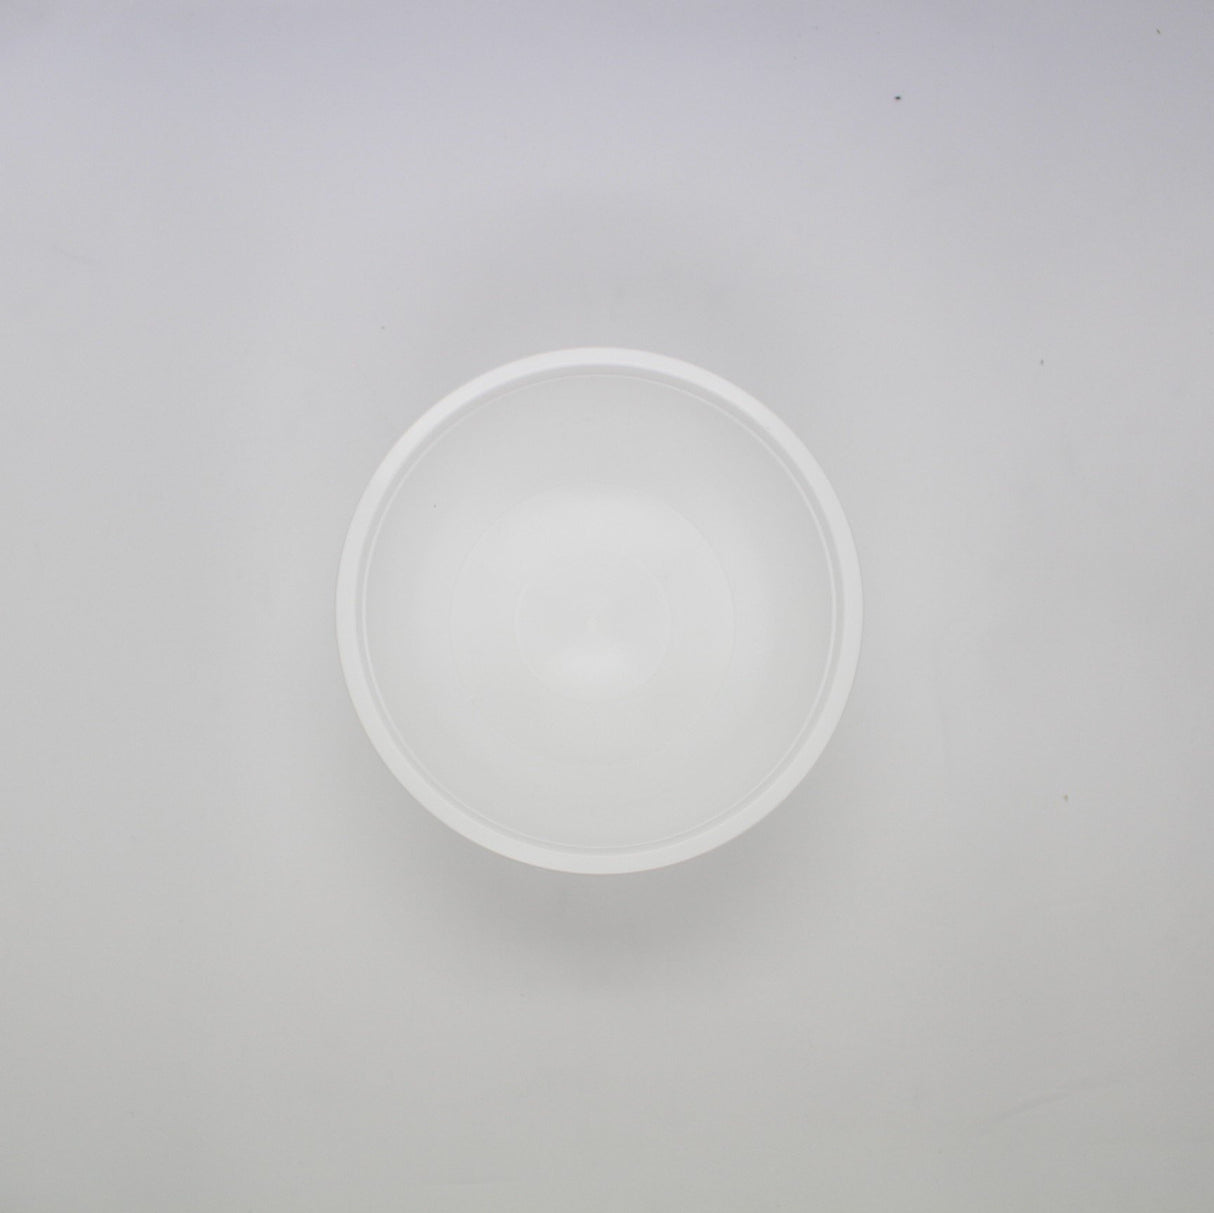 850FBM | 28oz Microwaveable PP White Round Bowl (Base Only) - 600 Pcs - HD Plastic Product (Canada). Inc